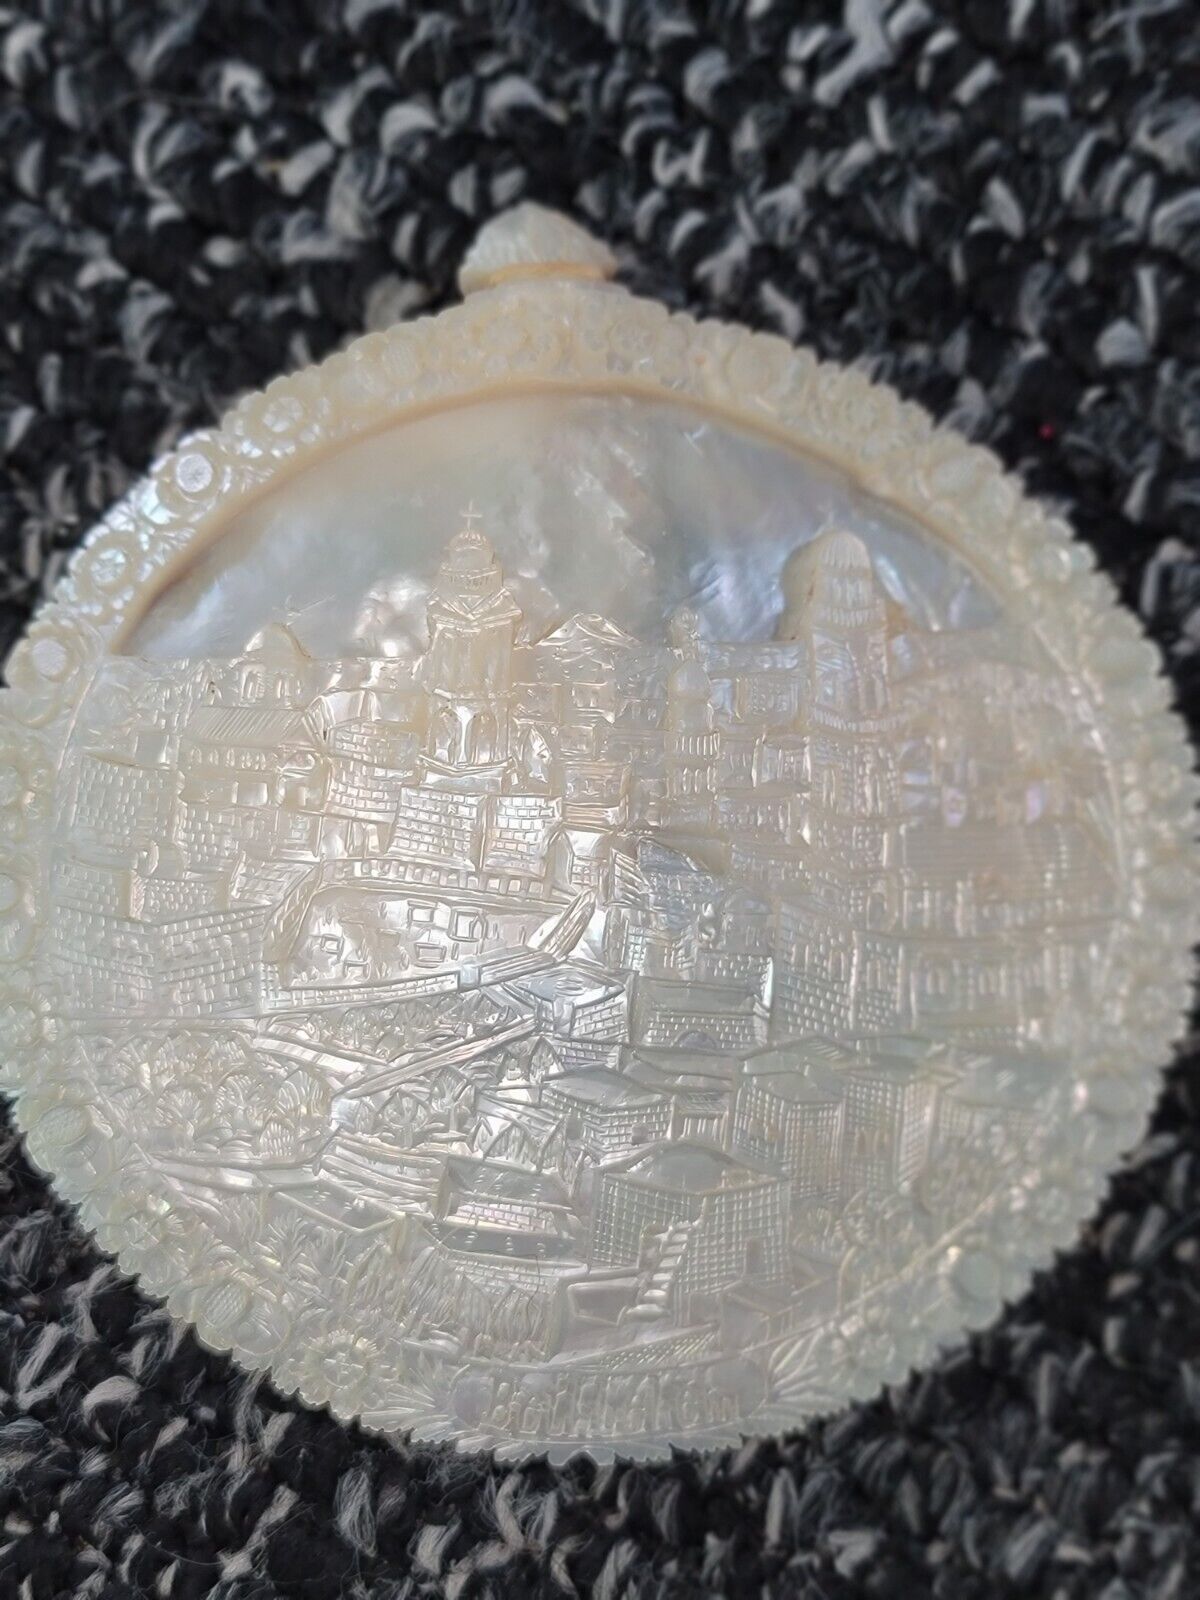 LG Rare Antique Early 19 Century Hand Carved Mother Pearl Nacre Shell Bethlehem